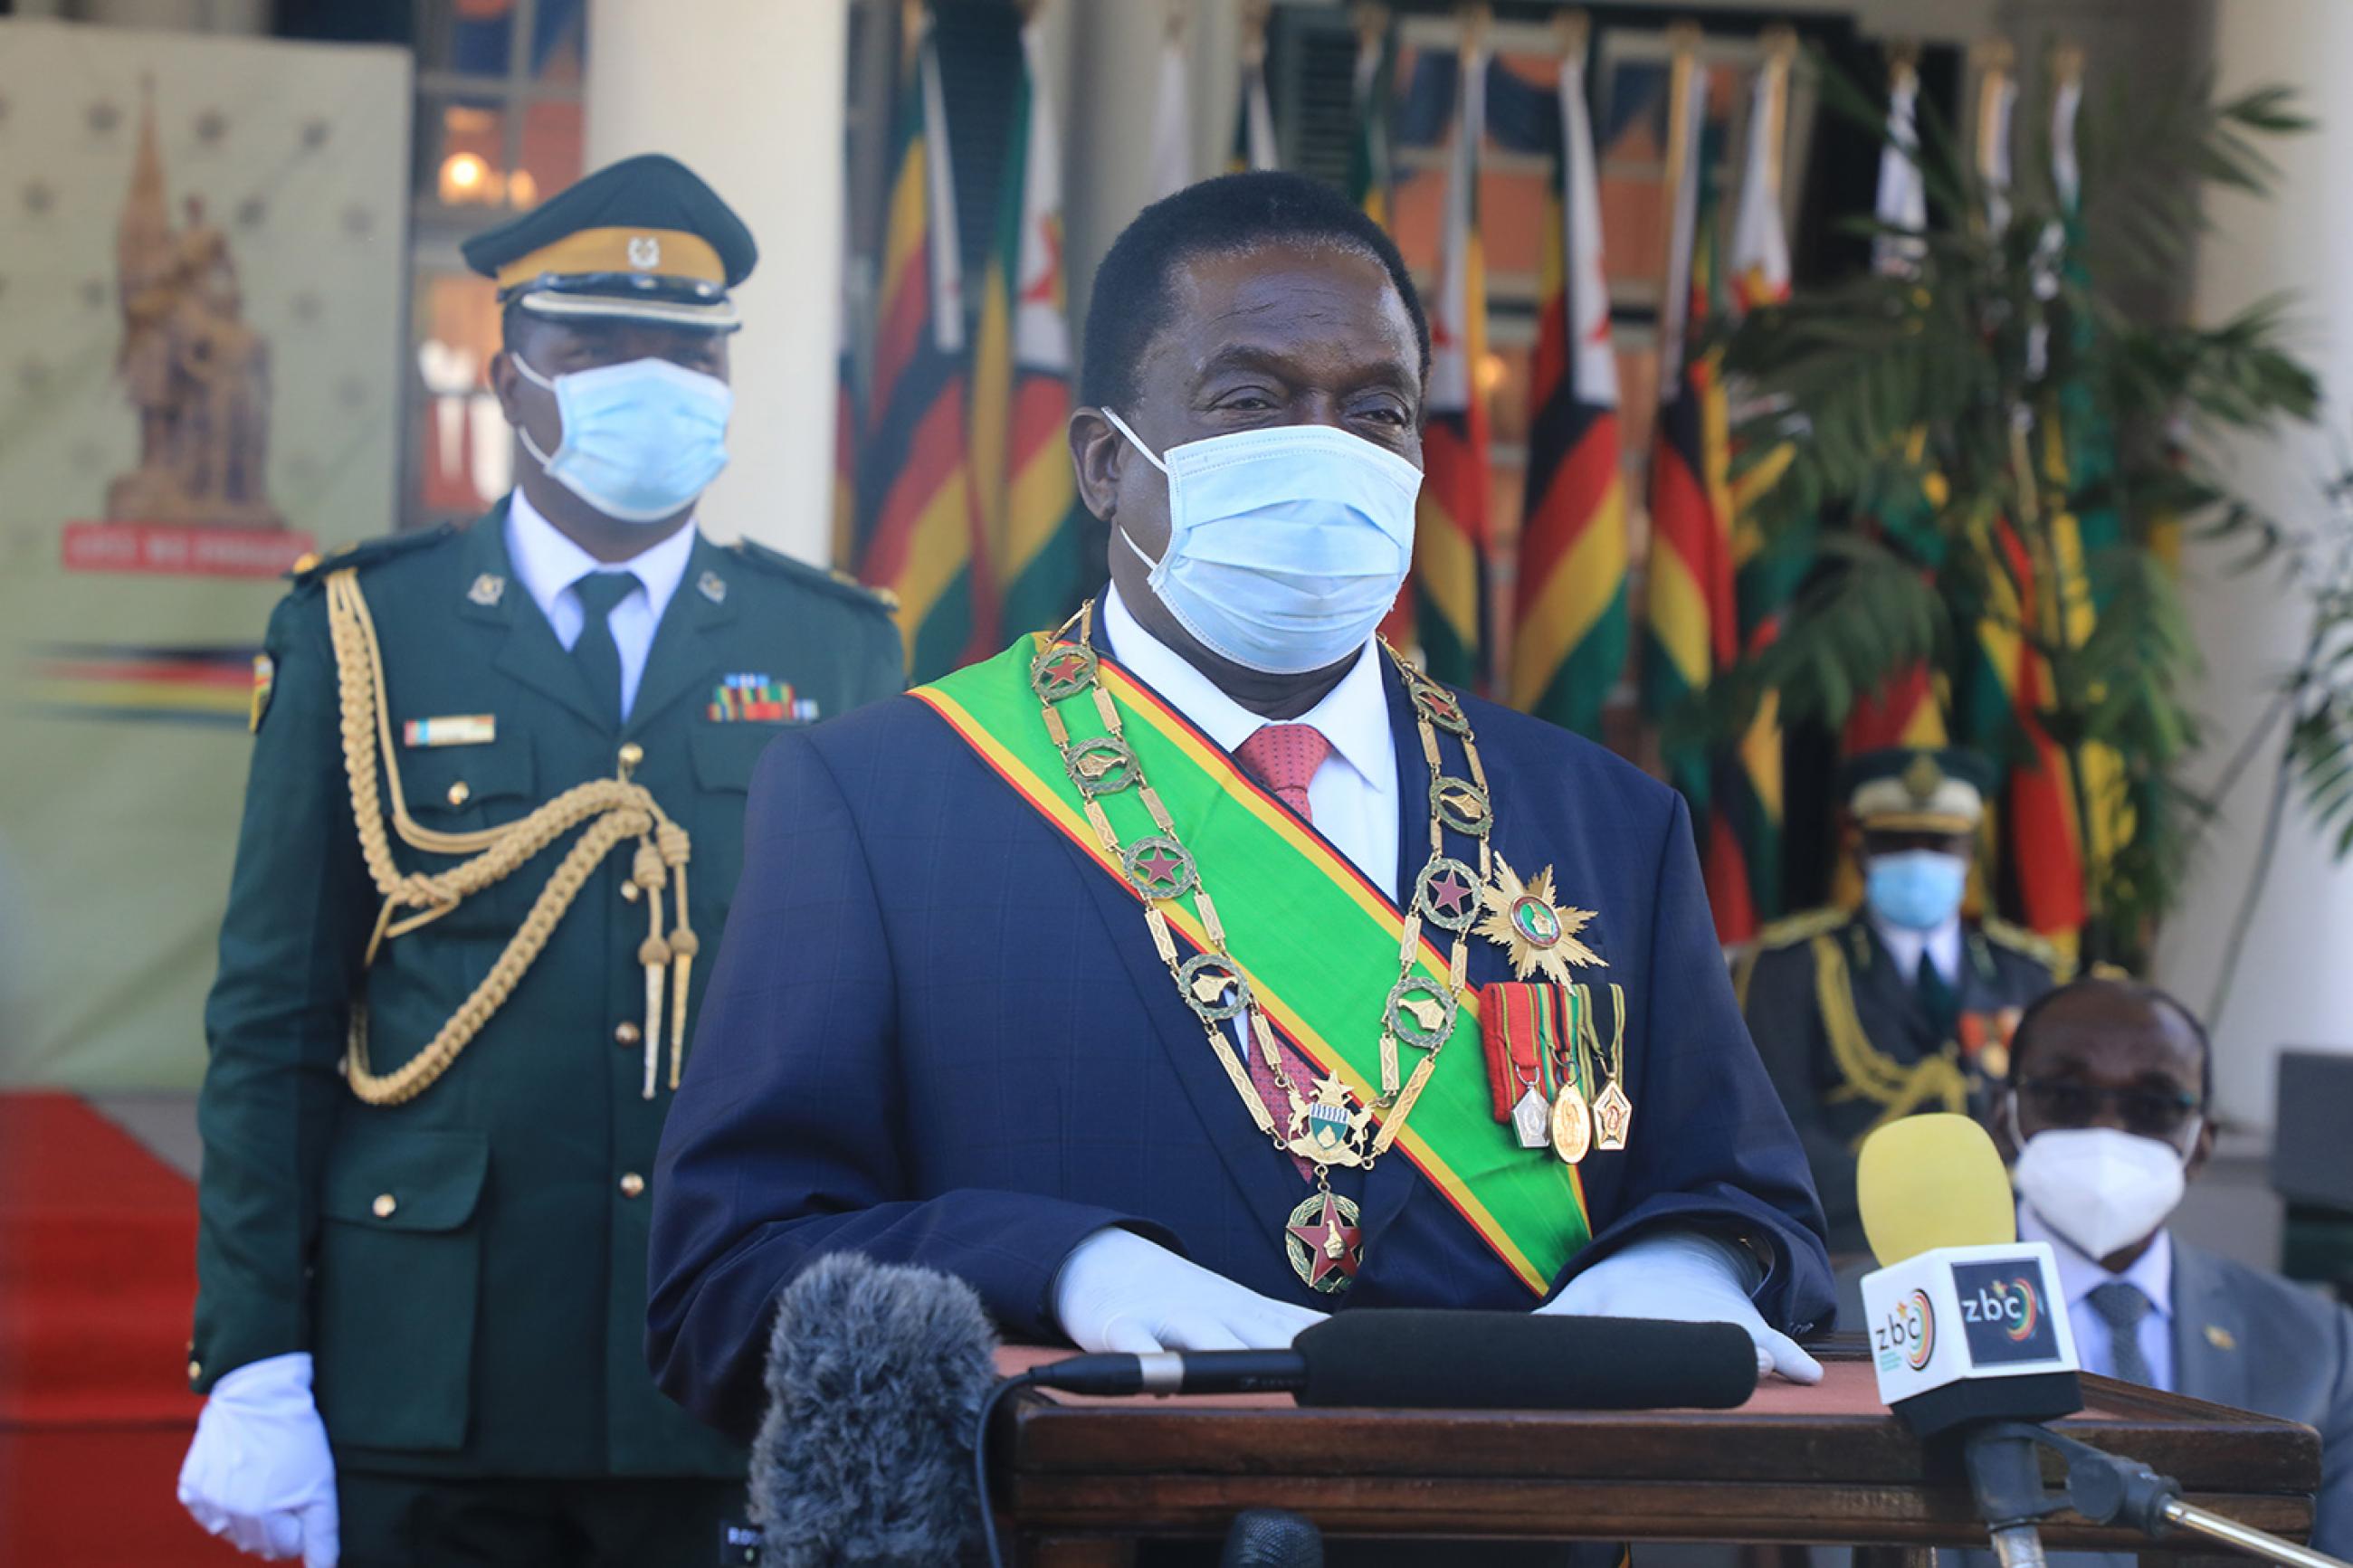 Zimbabwean President Emmerson Mnangagwa gives a speech at the Heroes' Day Commemoration in Harare, Zimbabwe, amid the ongoing COVID-19 pandemic on August 10, 2020. GETTY IMAGES/Wanda/Xinhua